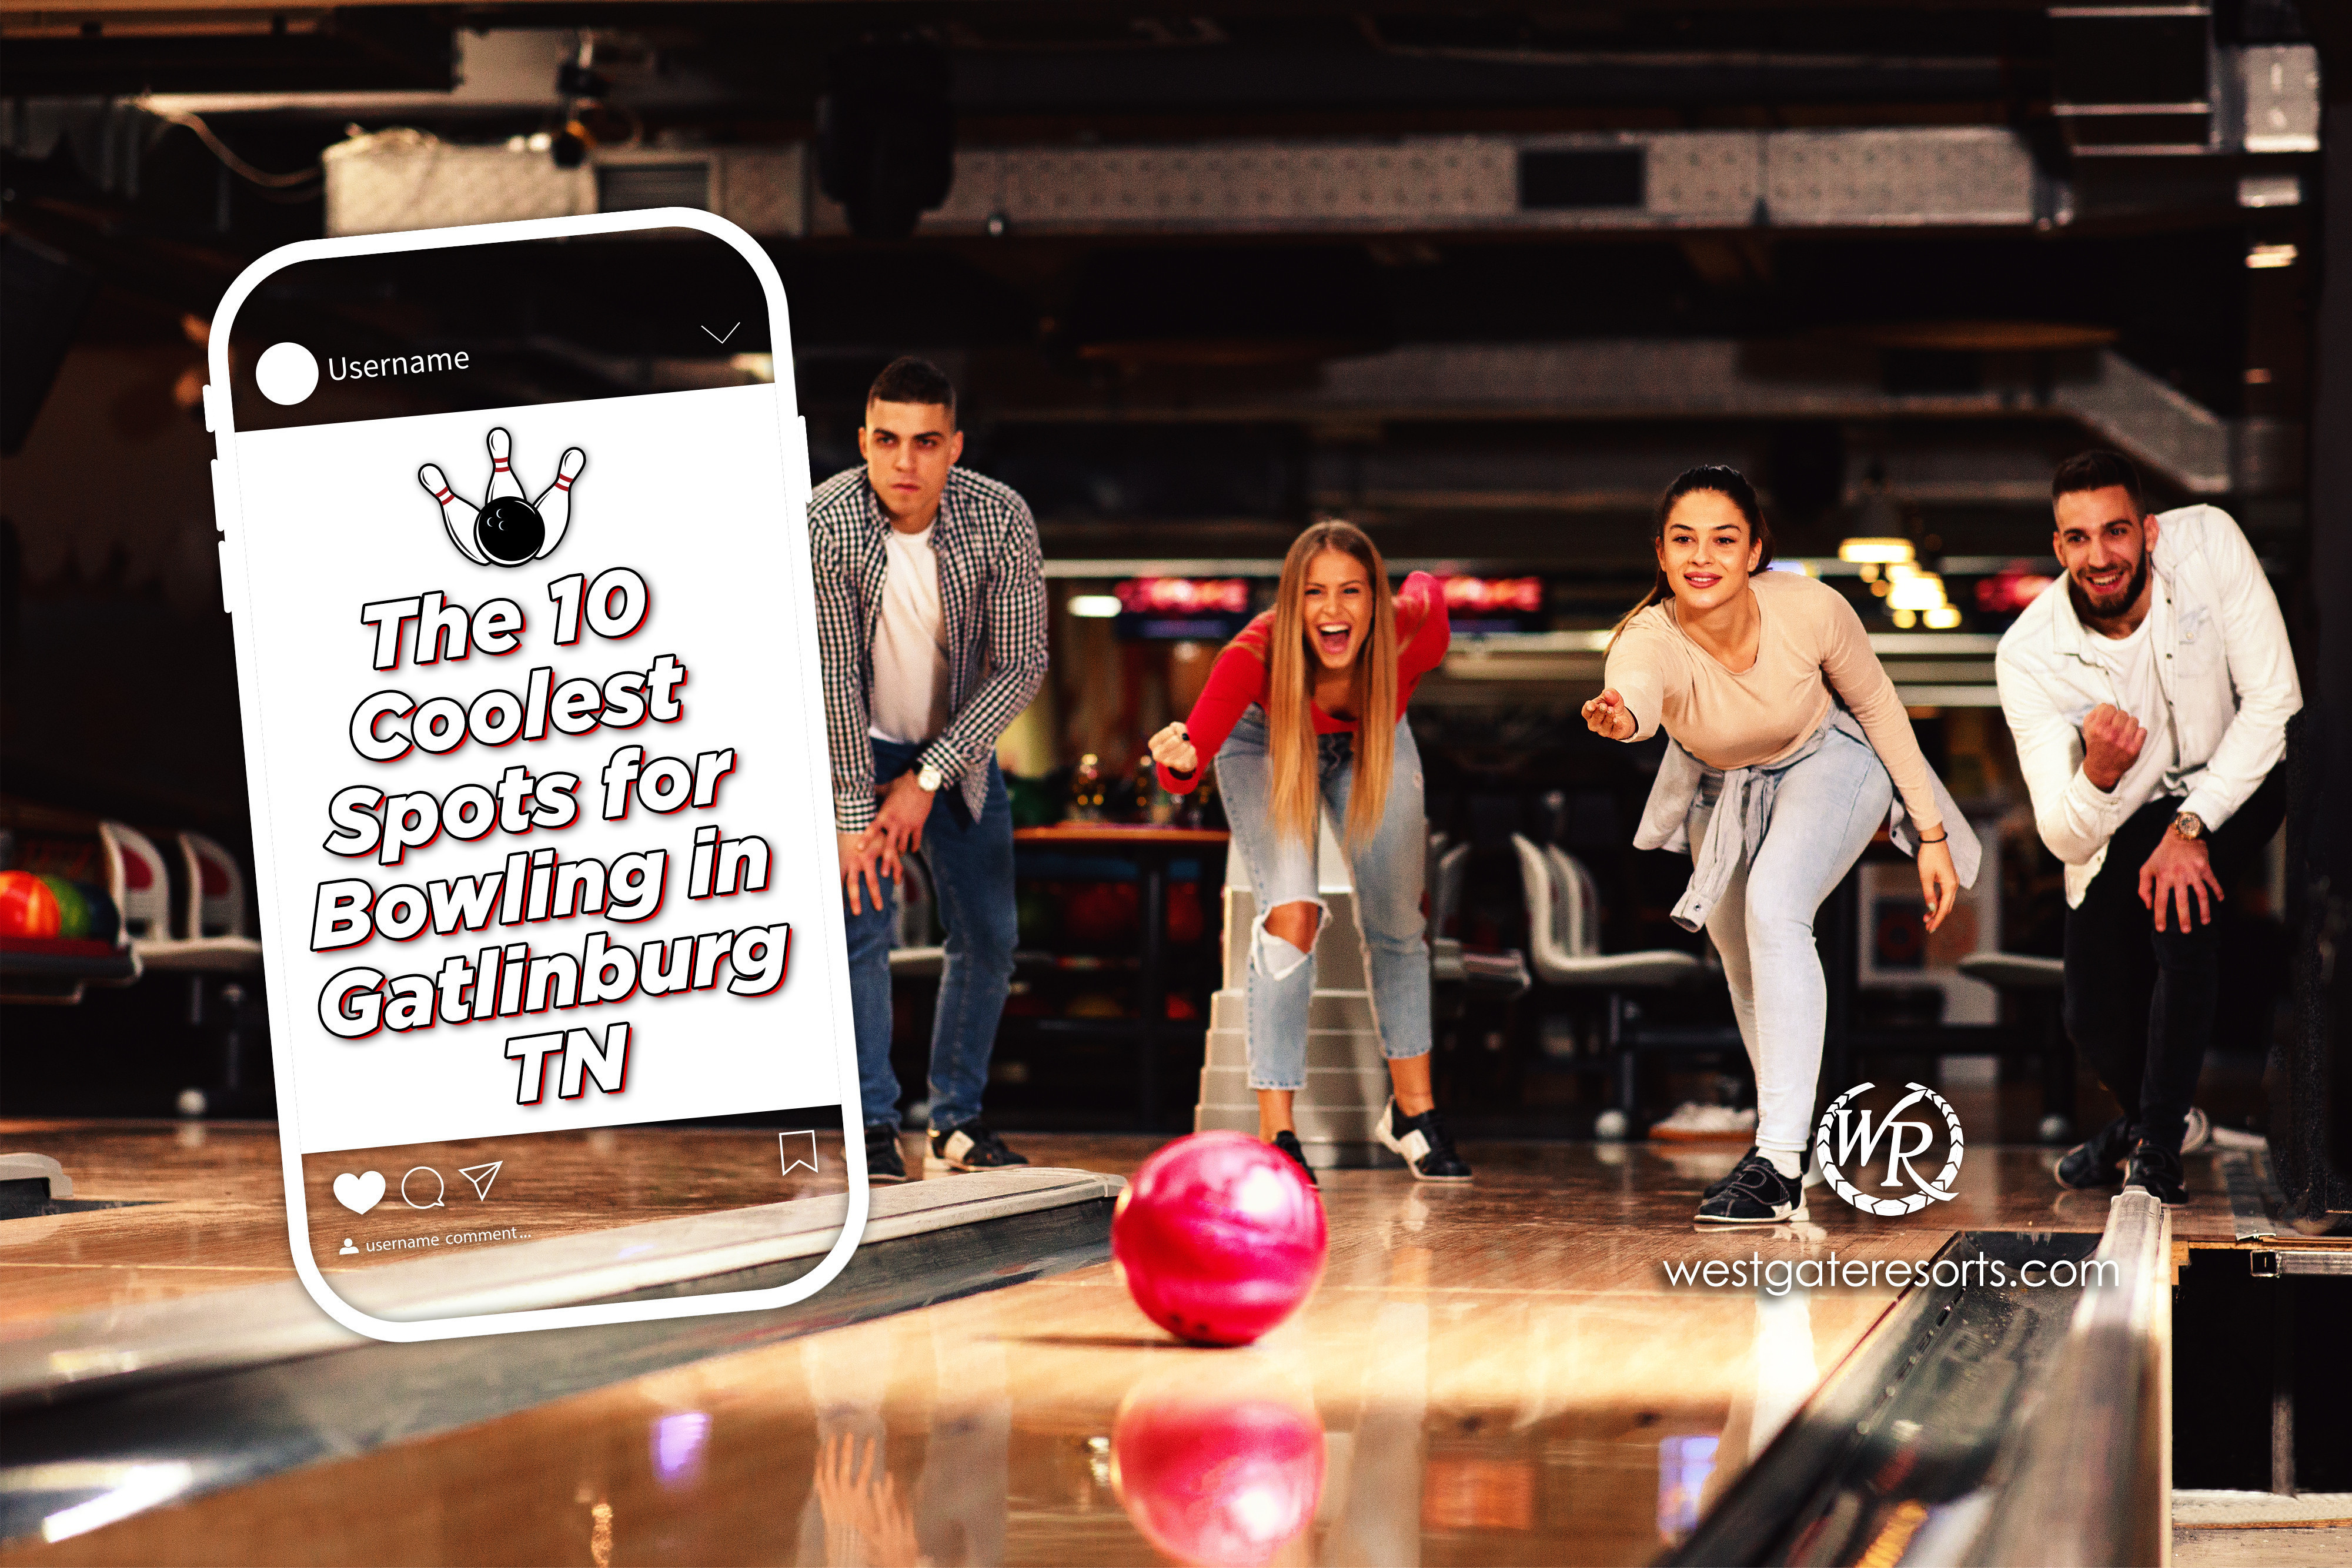 The 10 Coolest Spots for Bowling in Gatlinburg TN